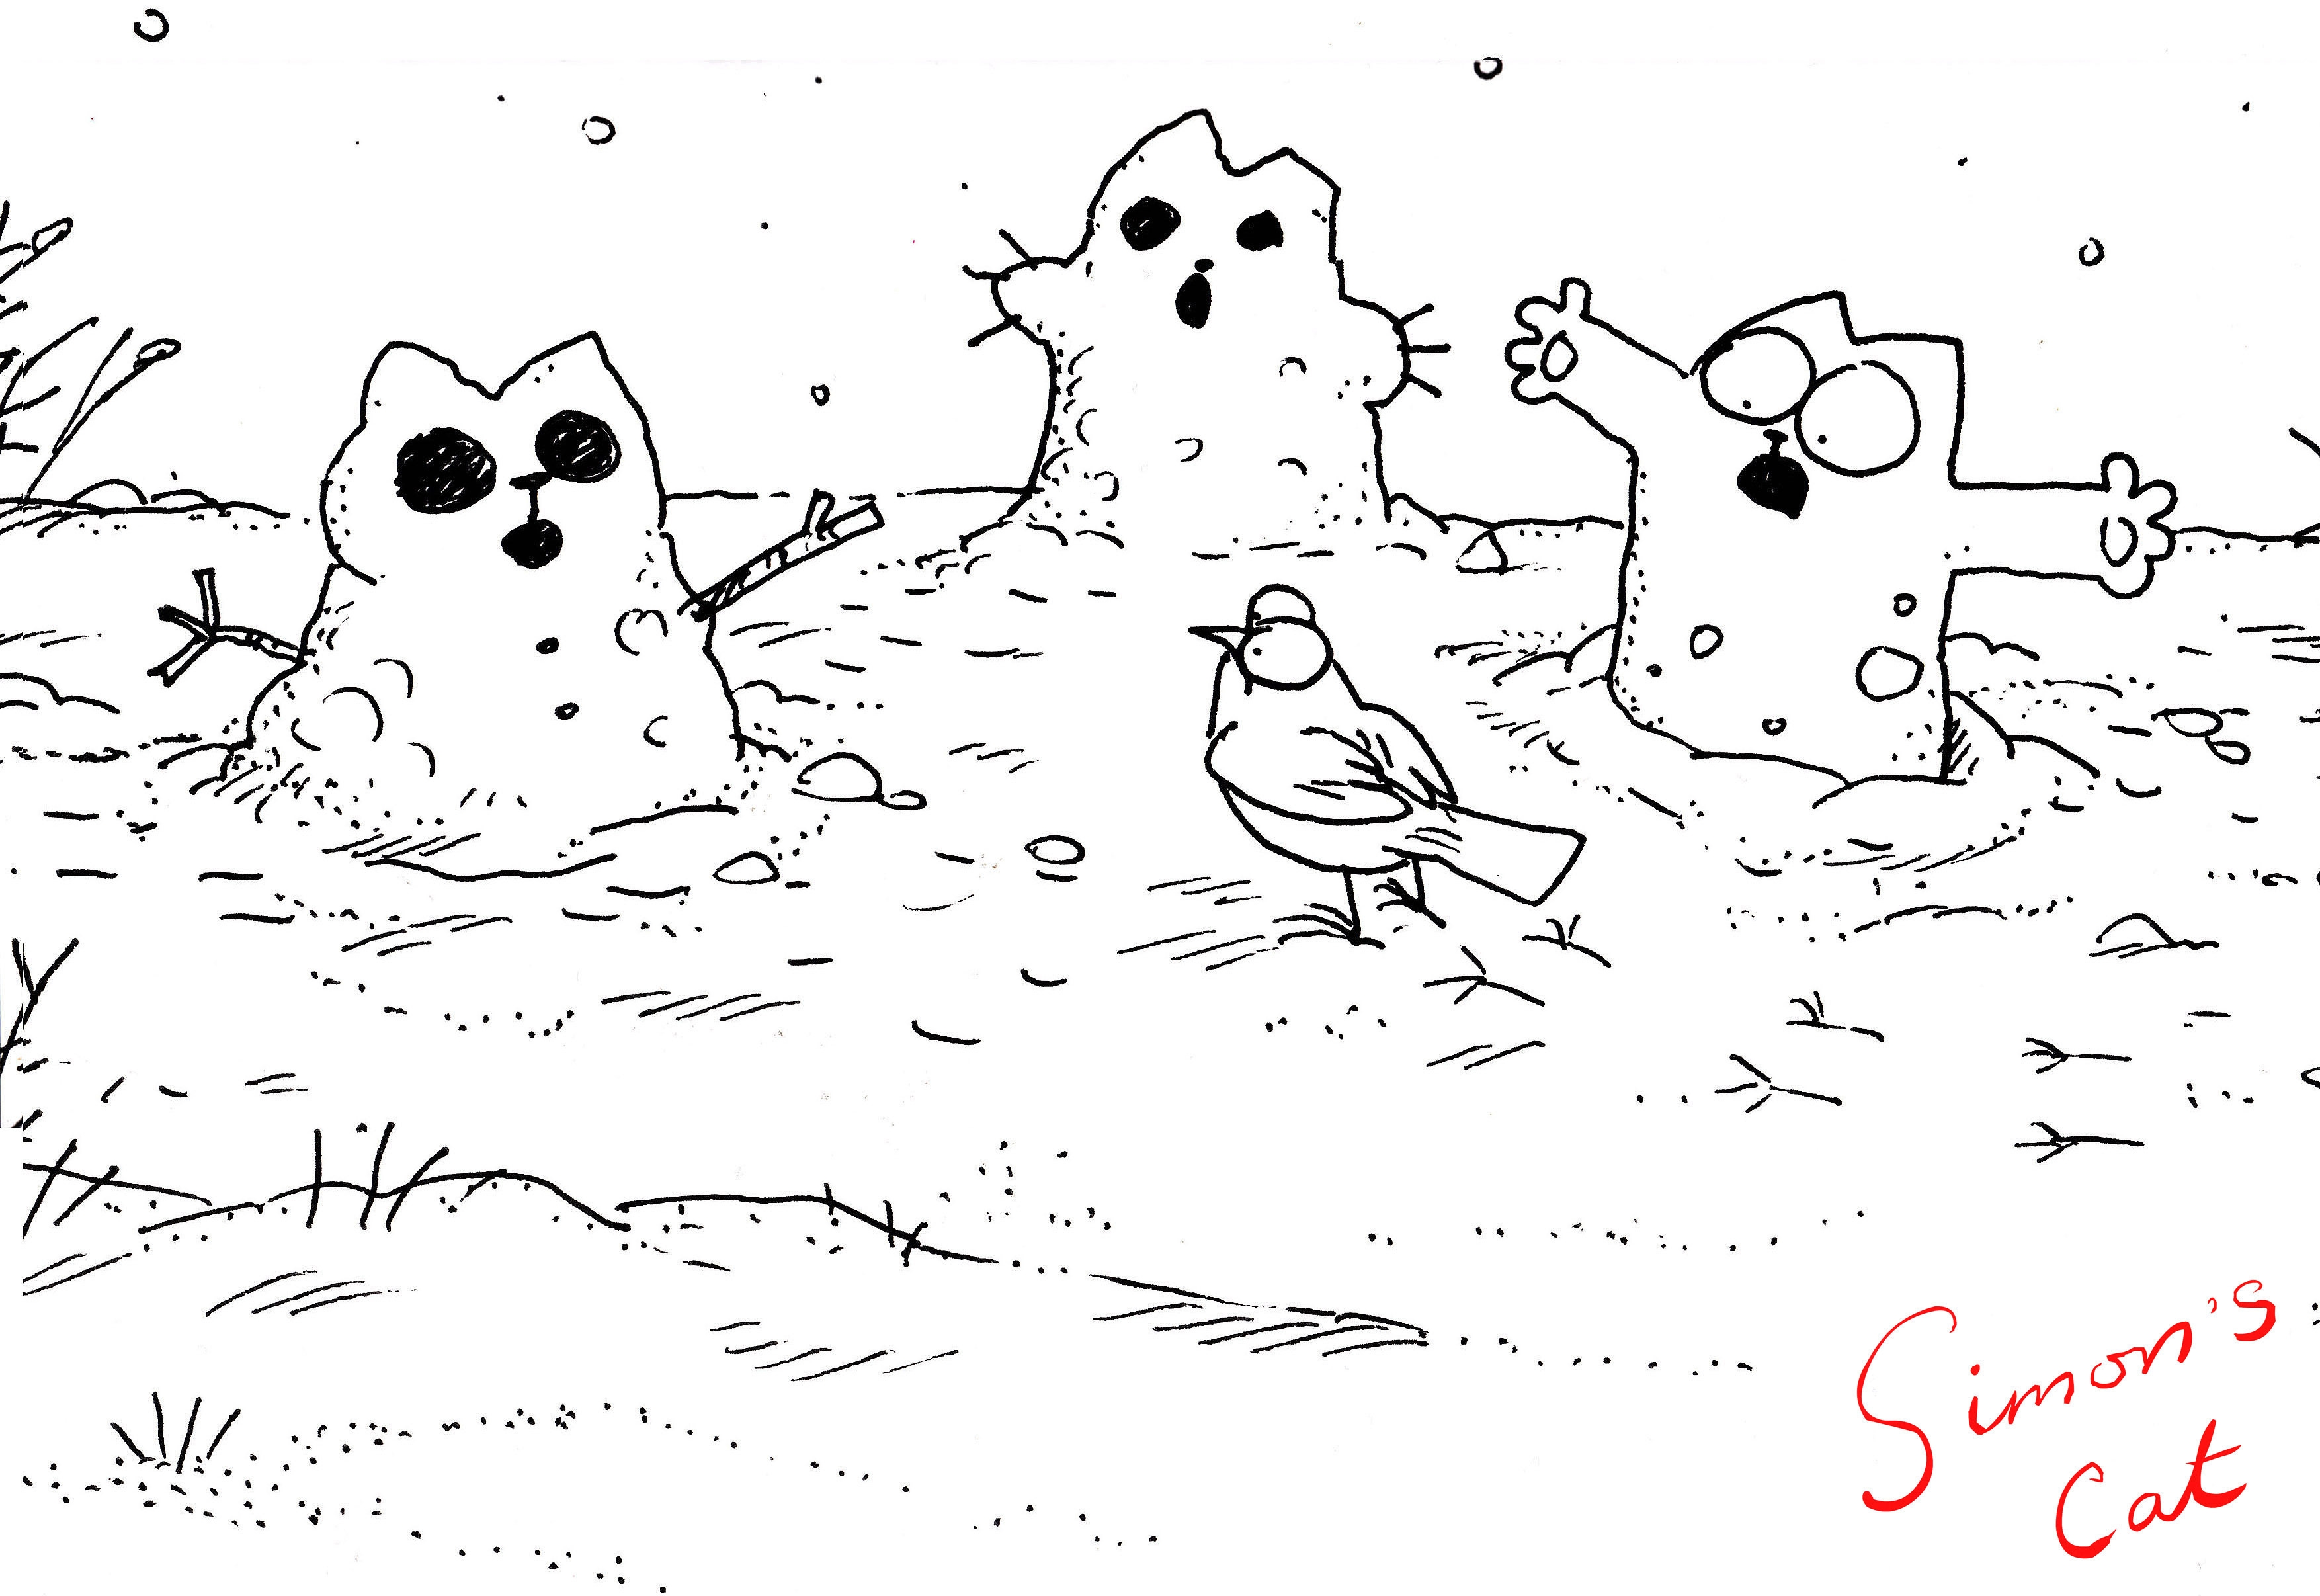 112067 download wallpaper cartoon, snowman, simon's cat, miscellanea, miscellaneous, disguise, camouflage, simon's cat screensavers and pictures for free